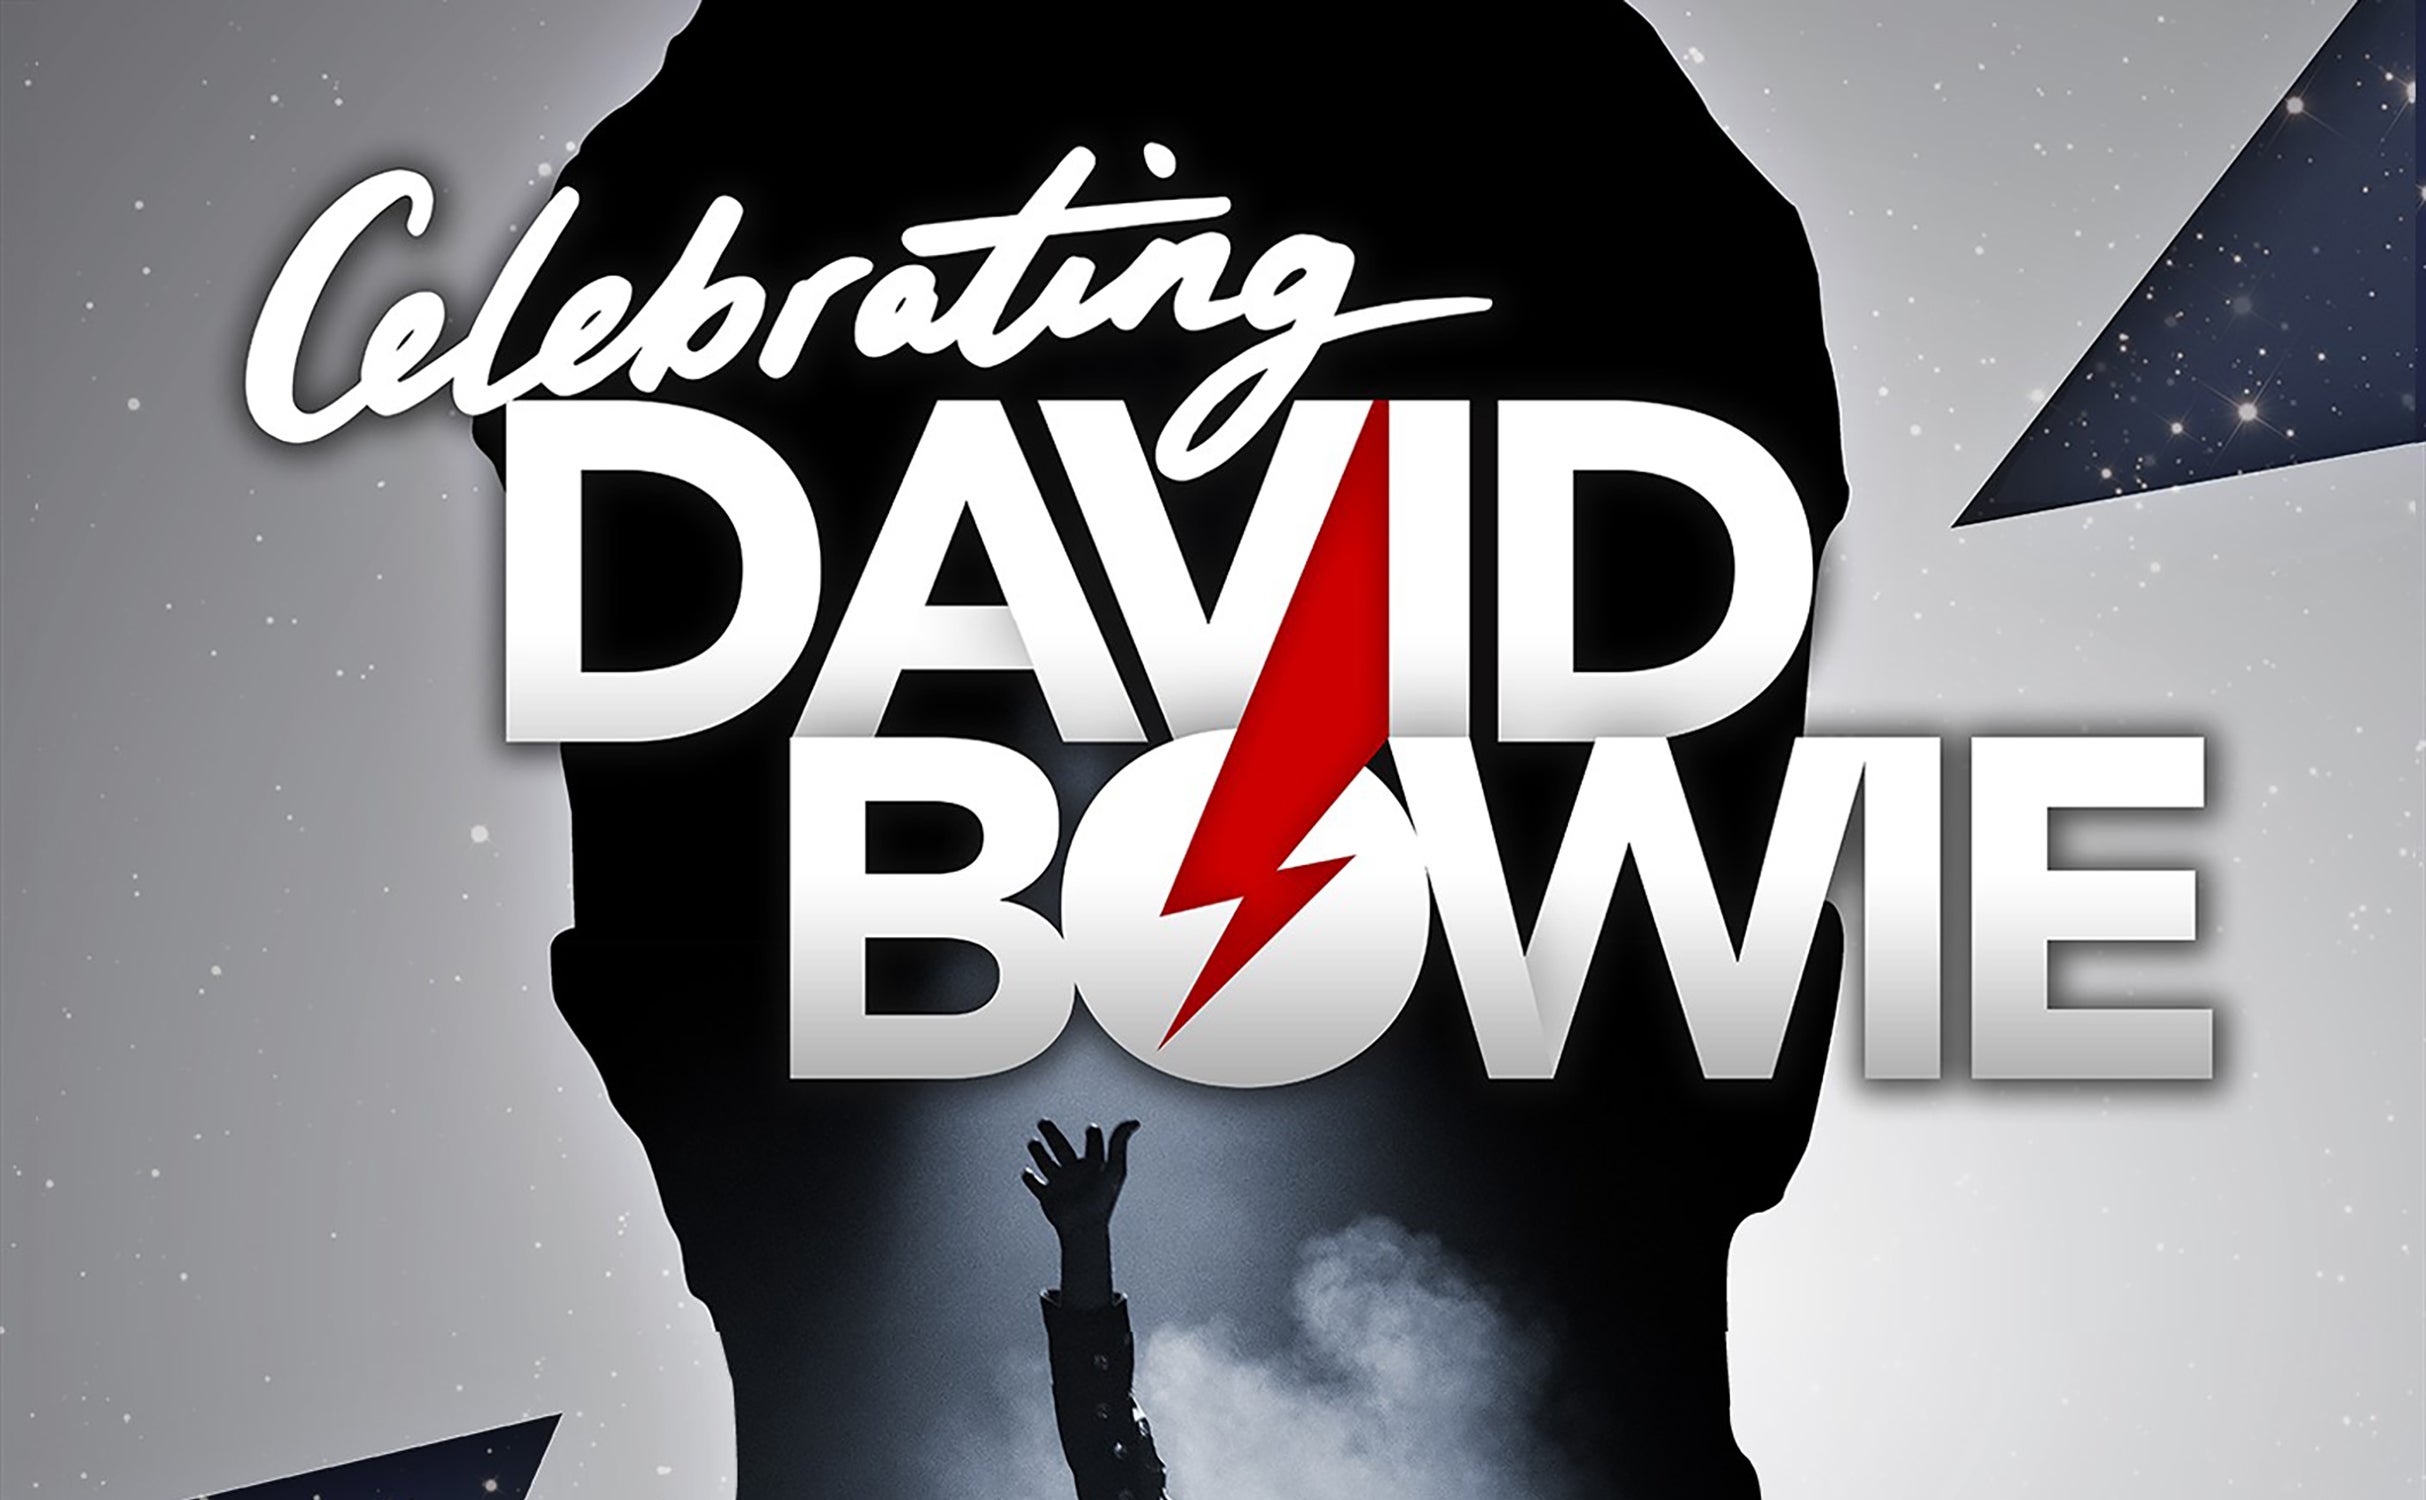 Celebrating David Bowie feat Adrian Belew, Scrote & more in Chattanooga promo photo for Venue presale offer code